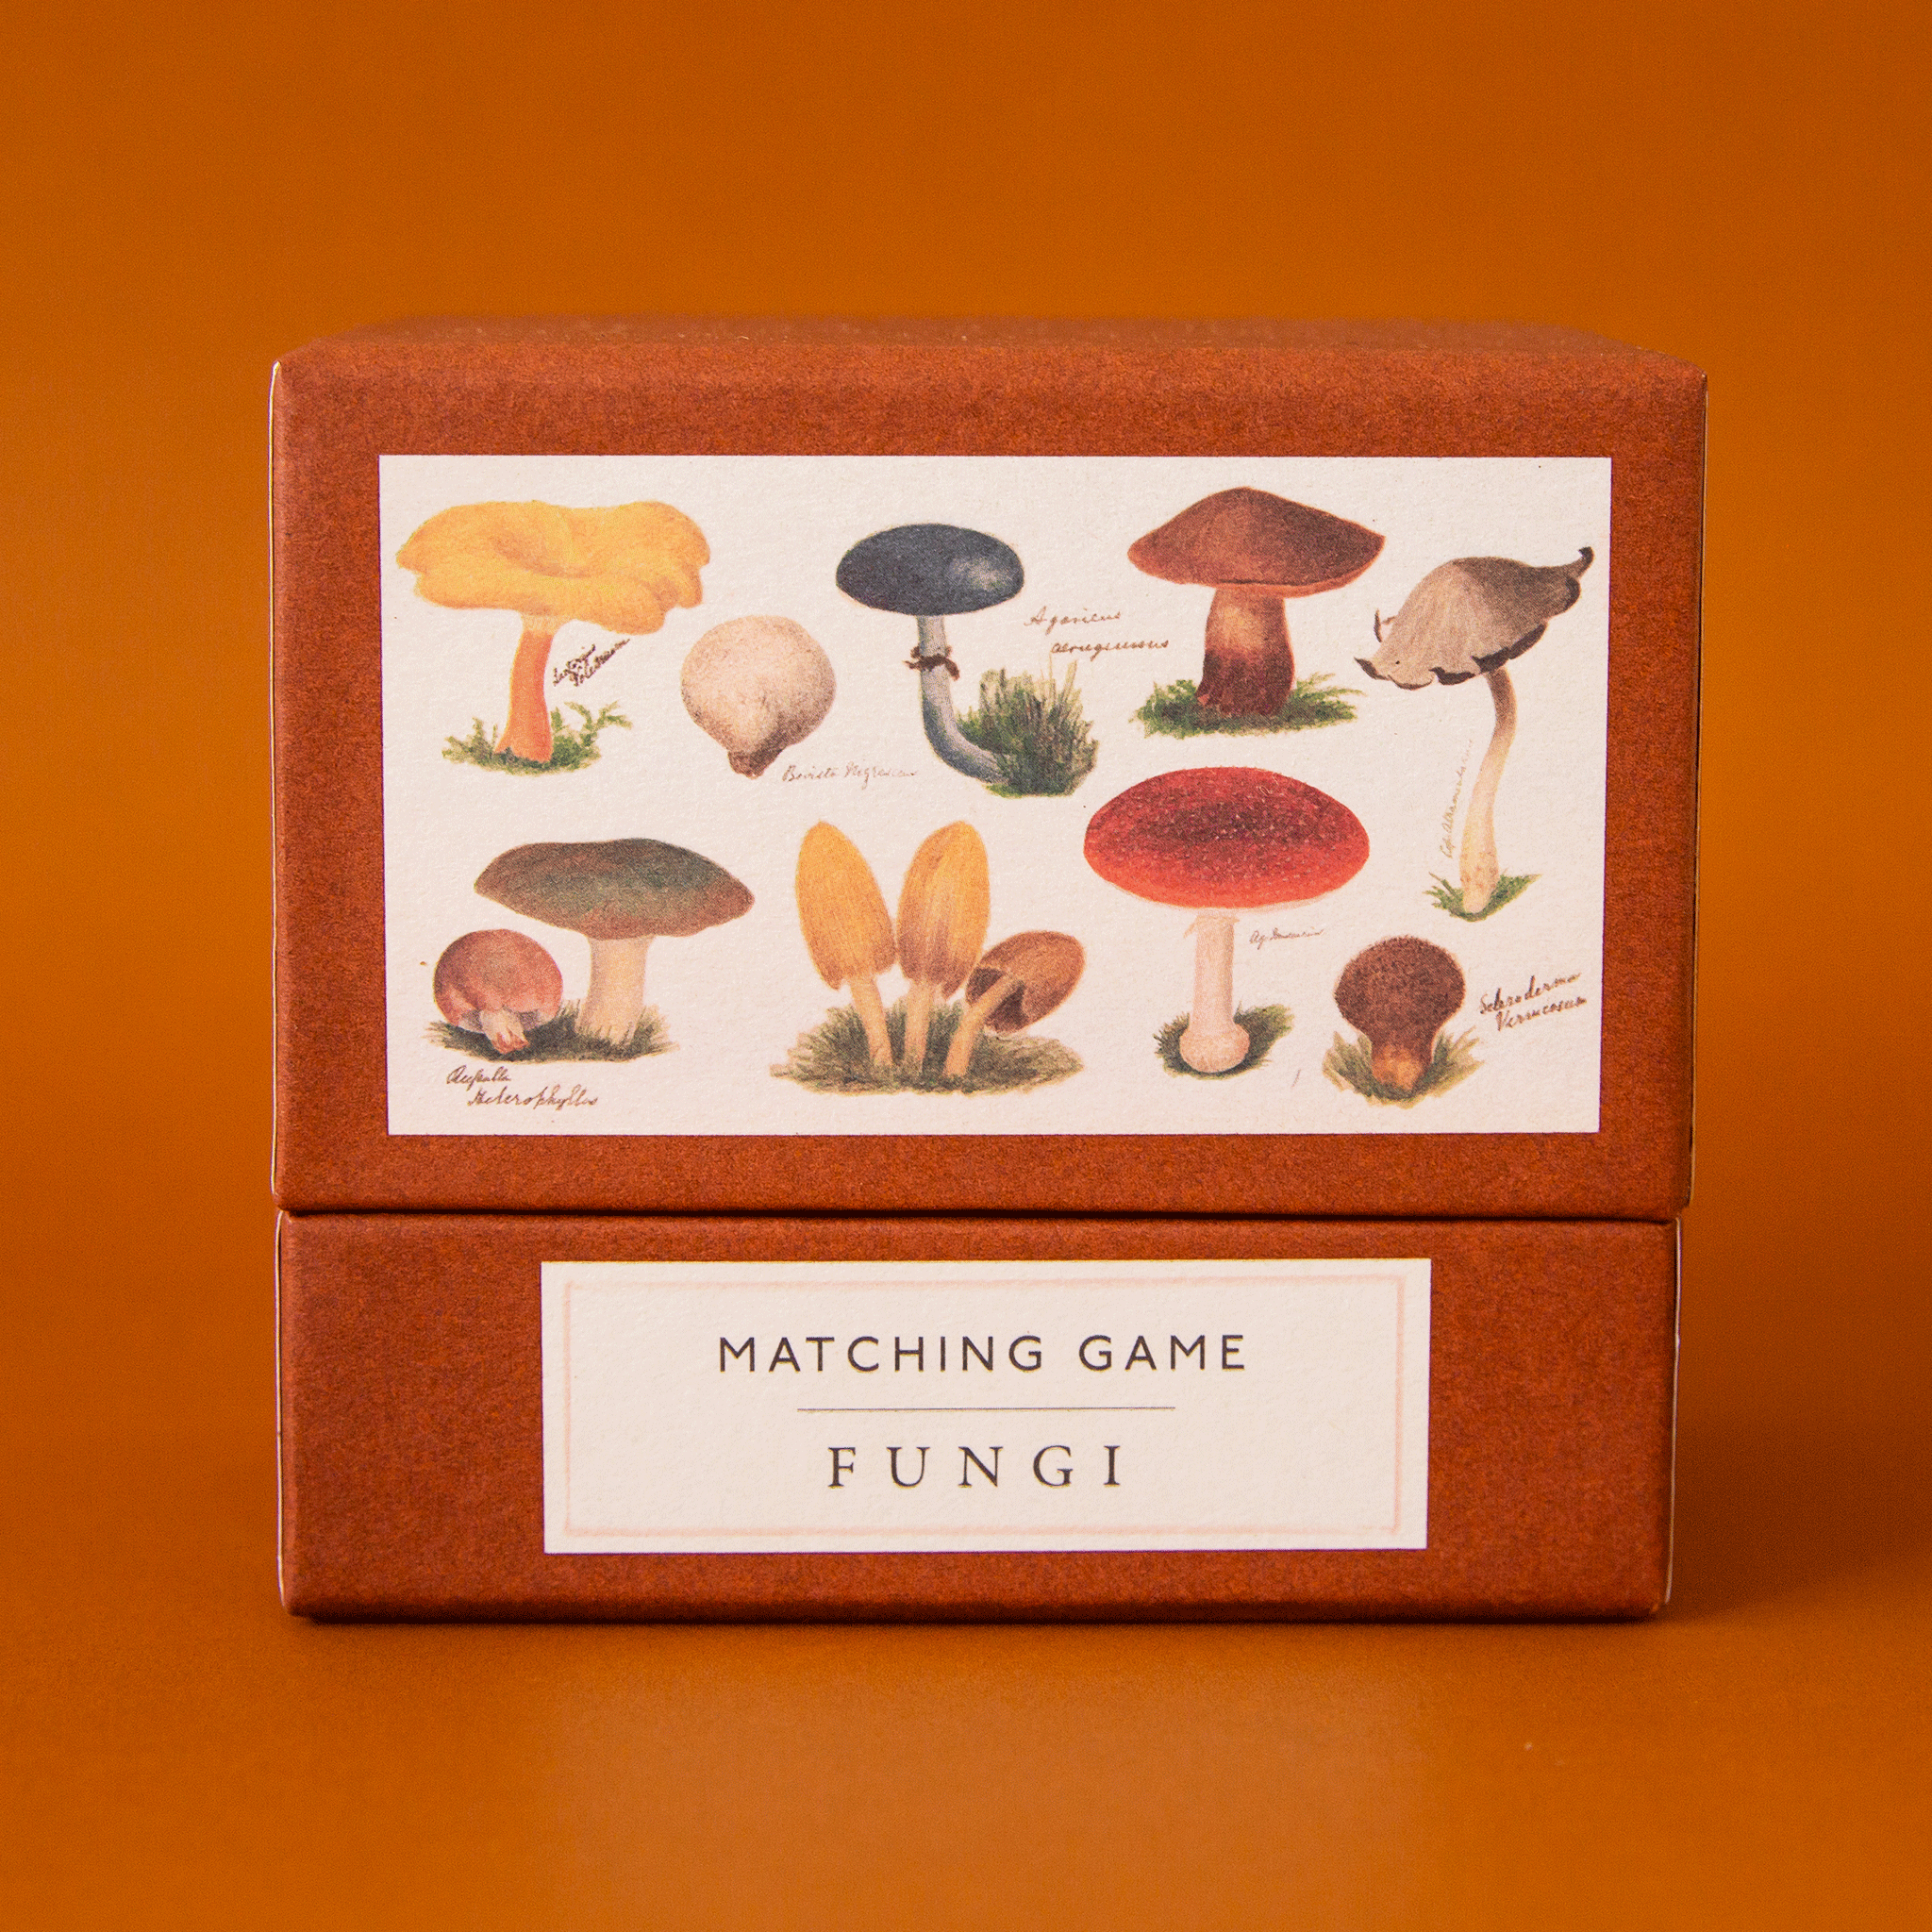 On an orange background is a burnt orange box with an assortment of mushrooms along with, "Matching Game Fungi".